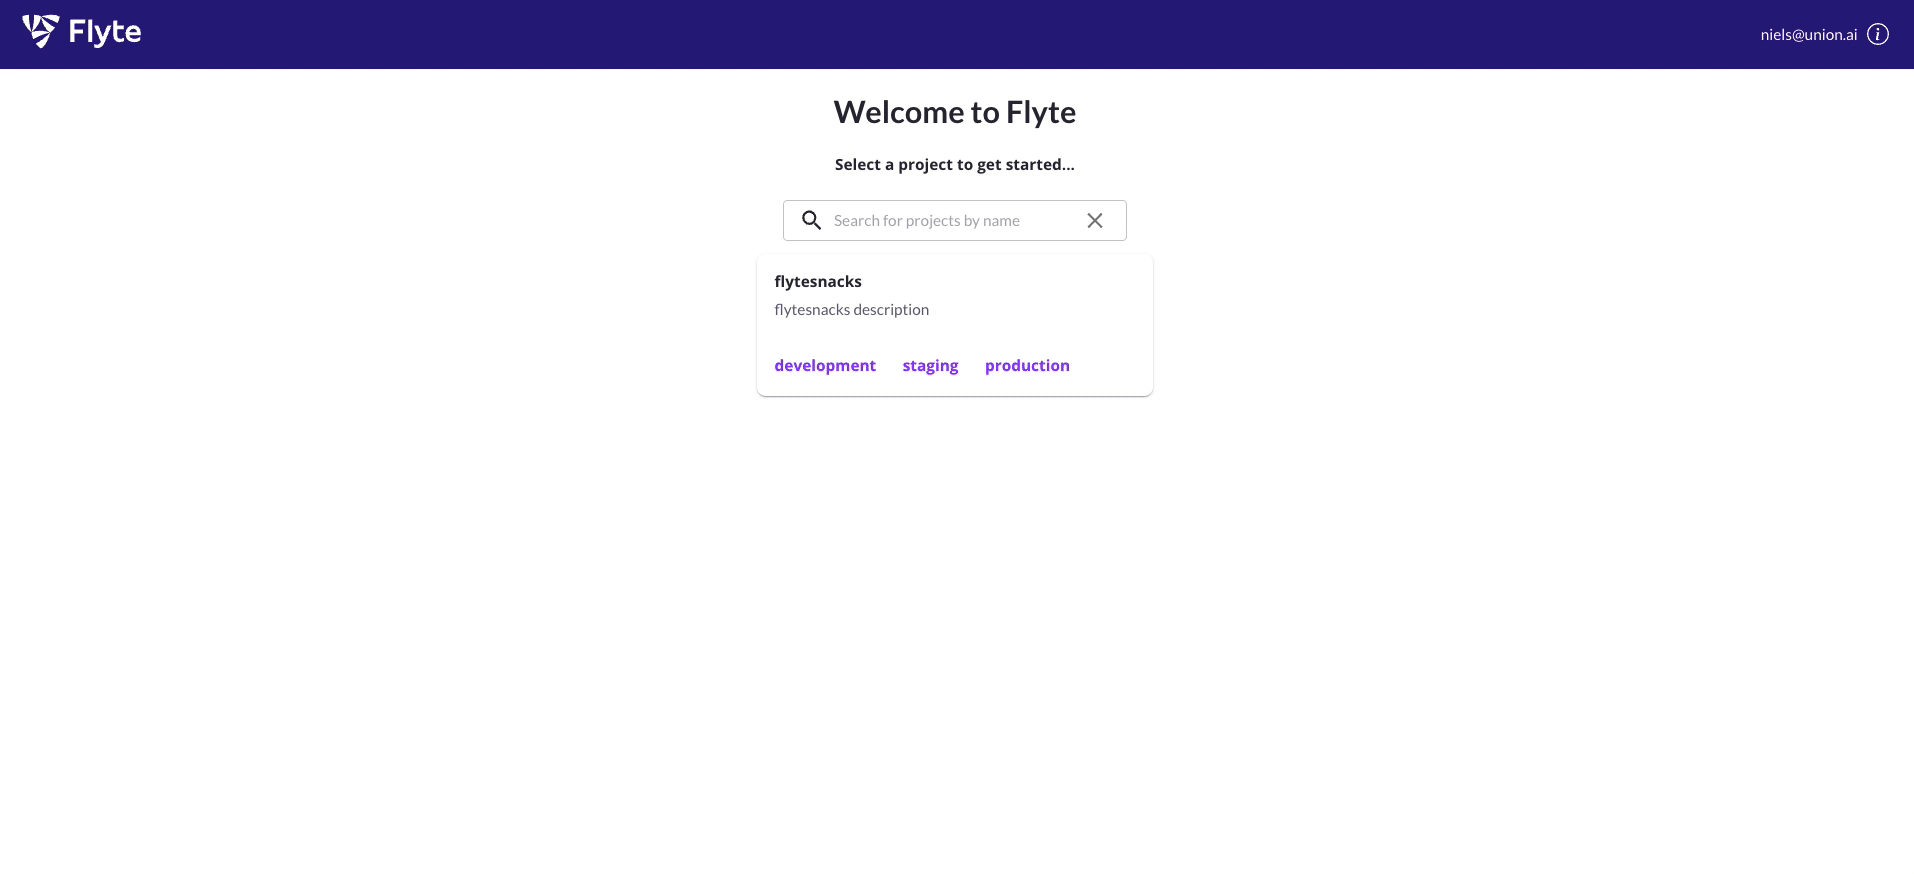 Getting started with Flyte, showing the welcome screen and Flyte dashboard